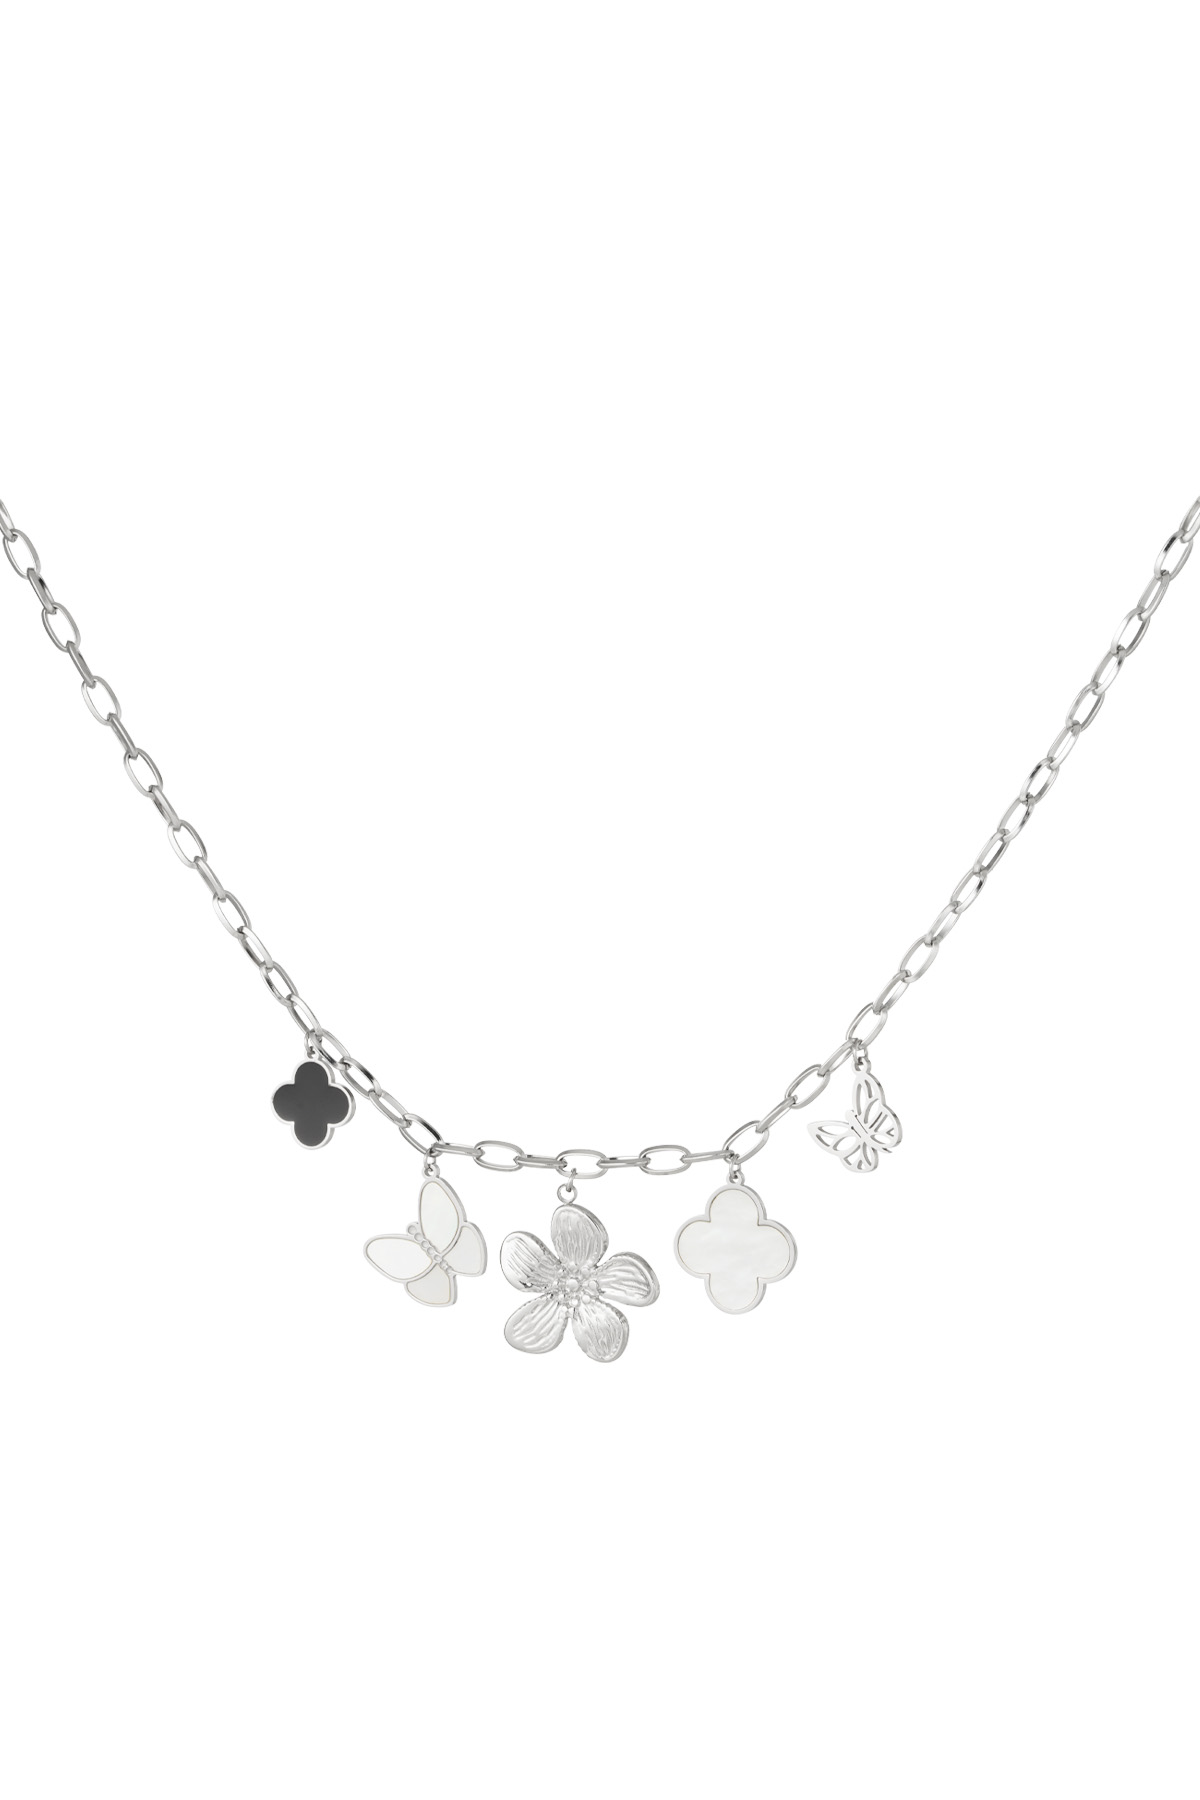 Charm necklace nature atmosphere - silver